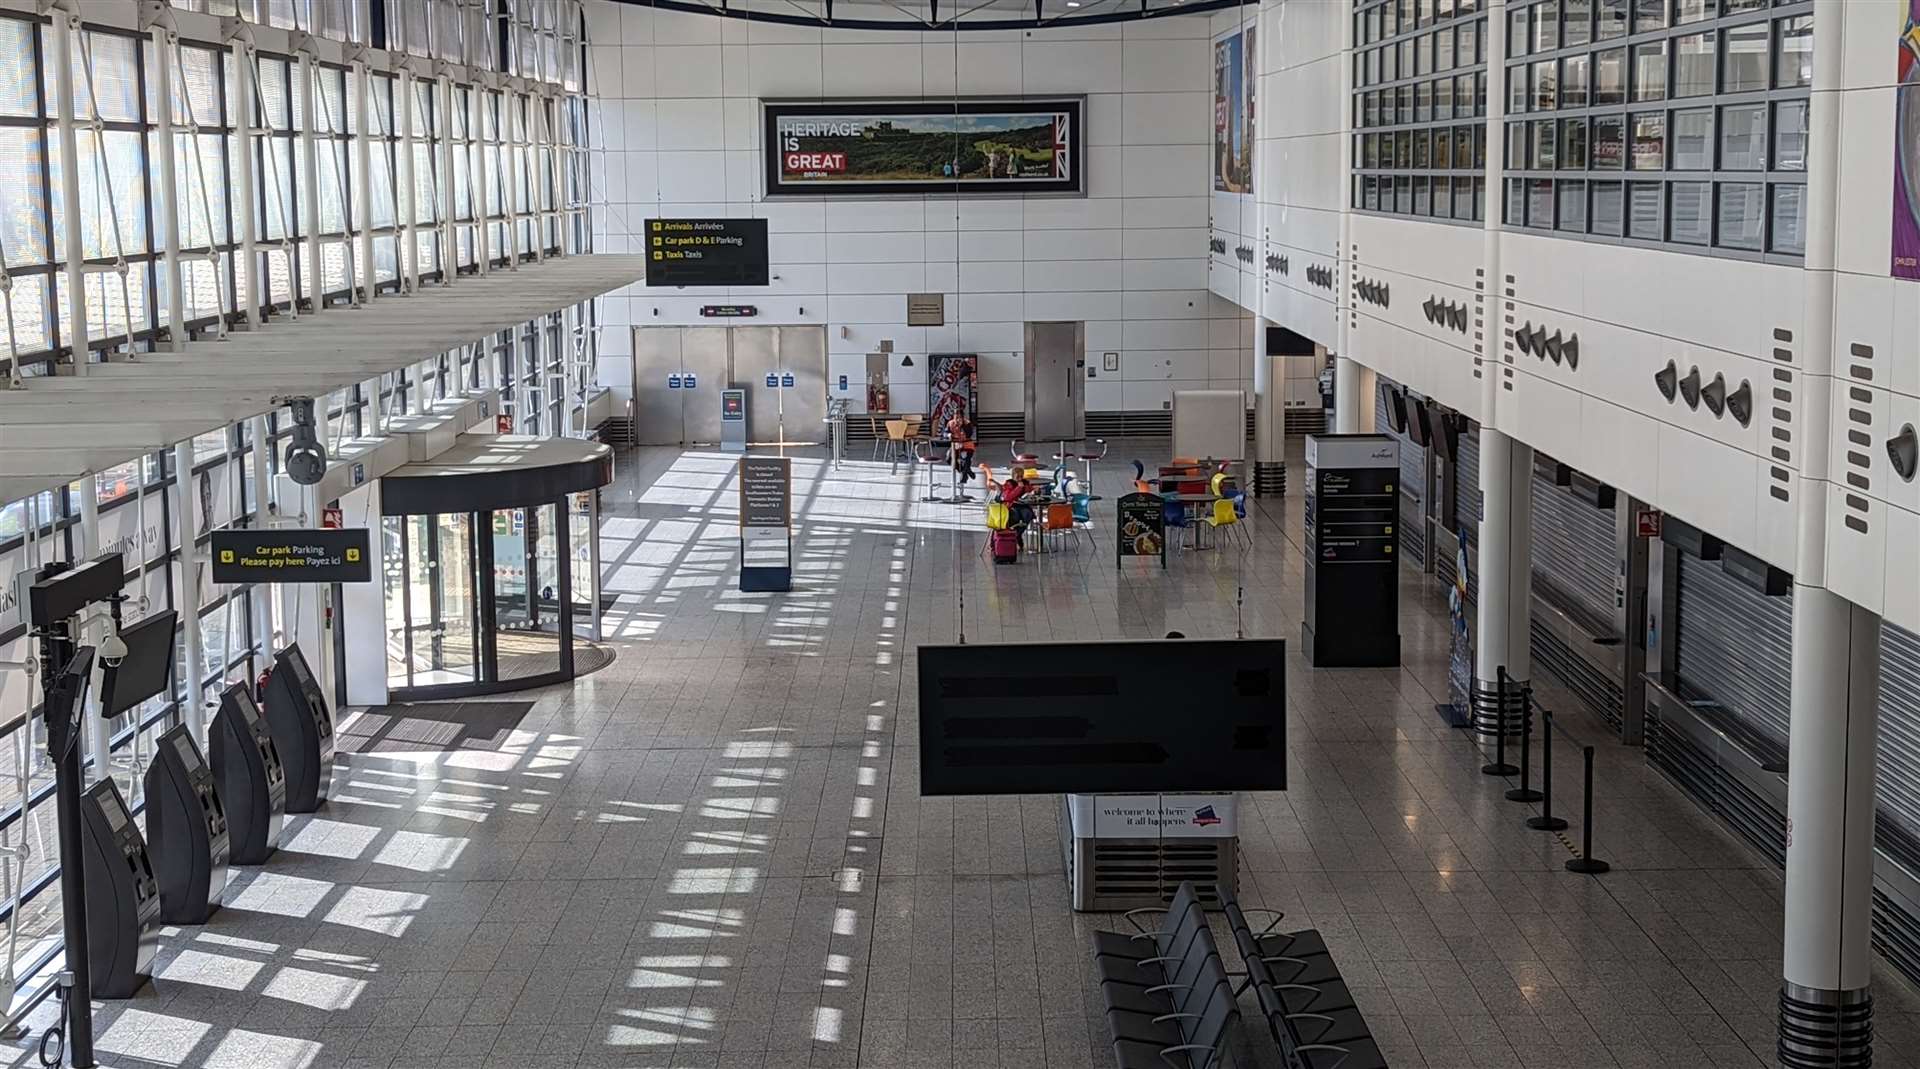 The international terminal sits largely deserted